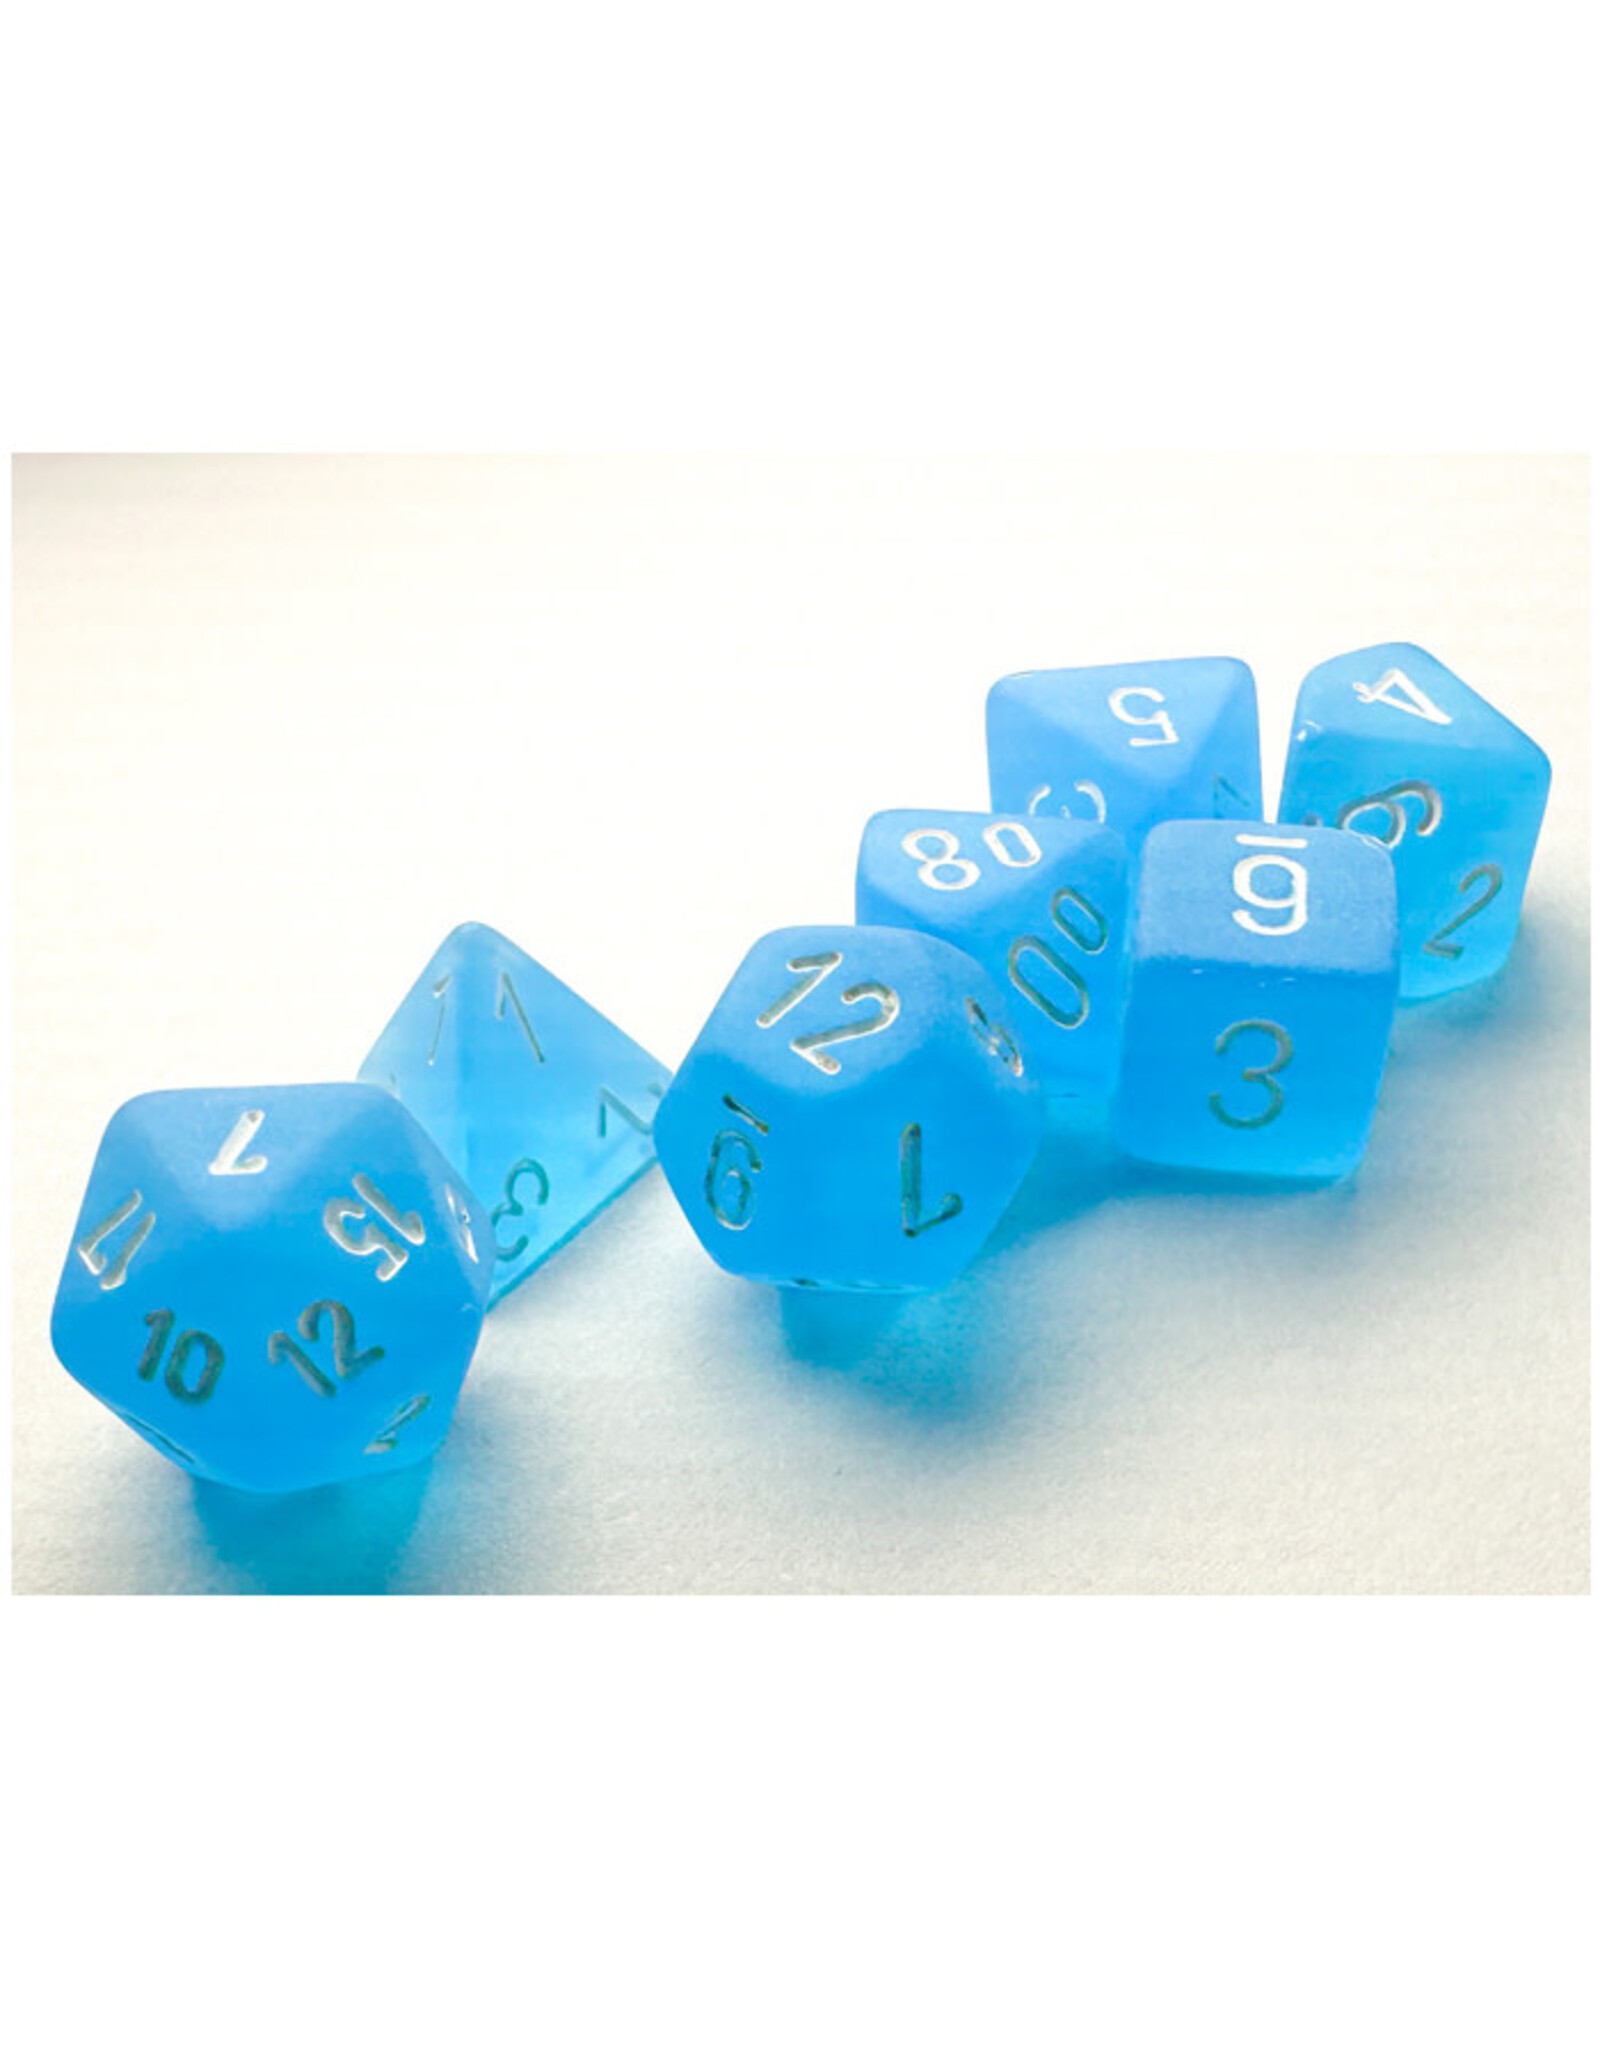 Chessex Mini Frosted Caribbean Blue with White poly 7 dice set